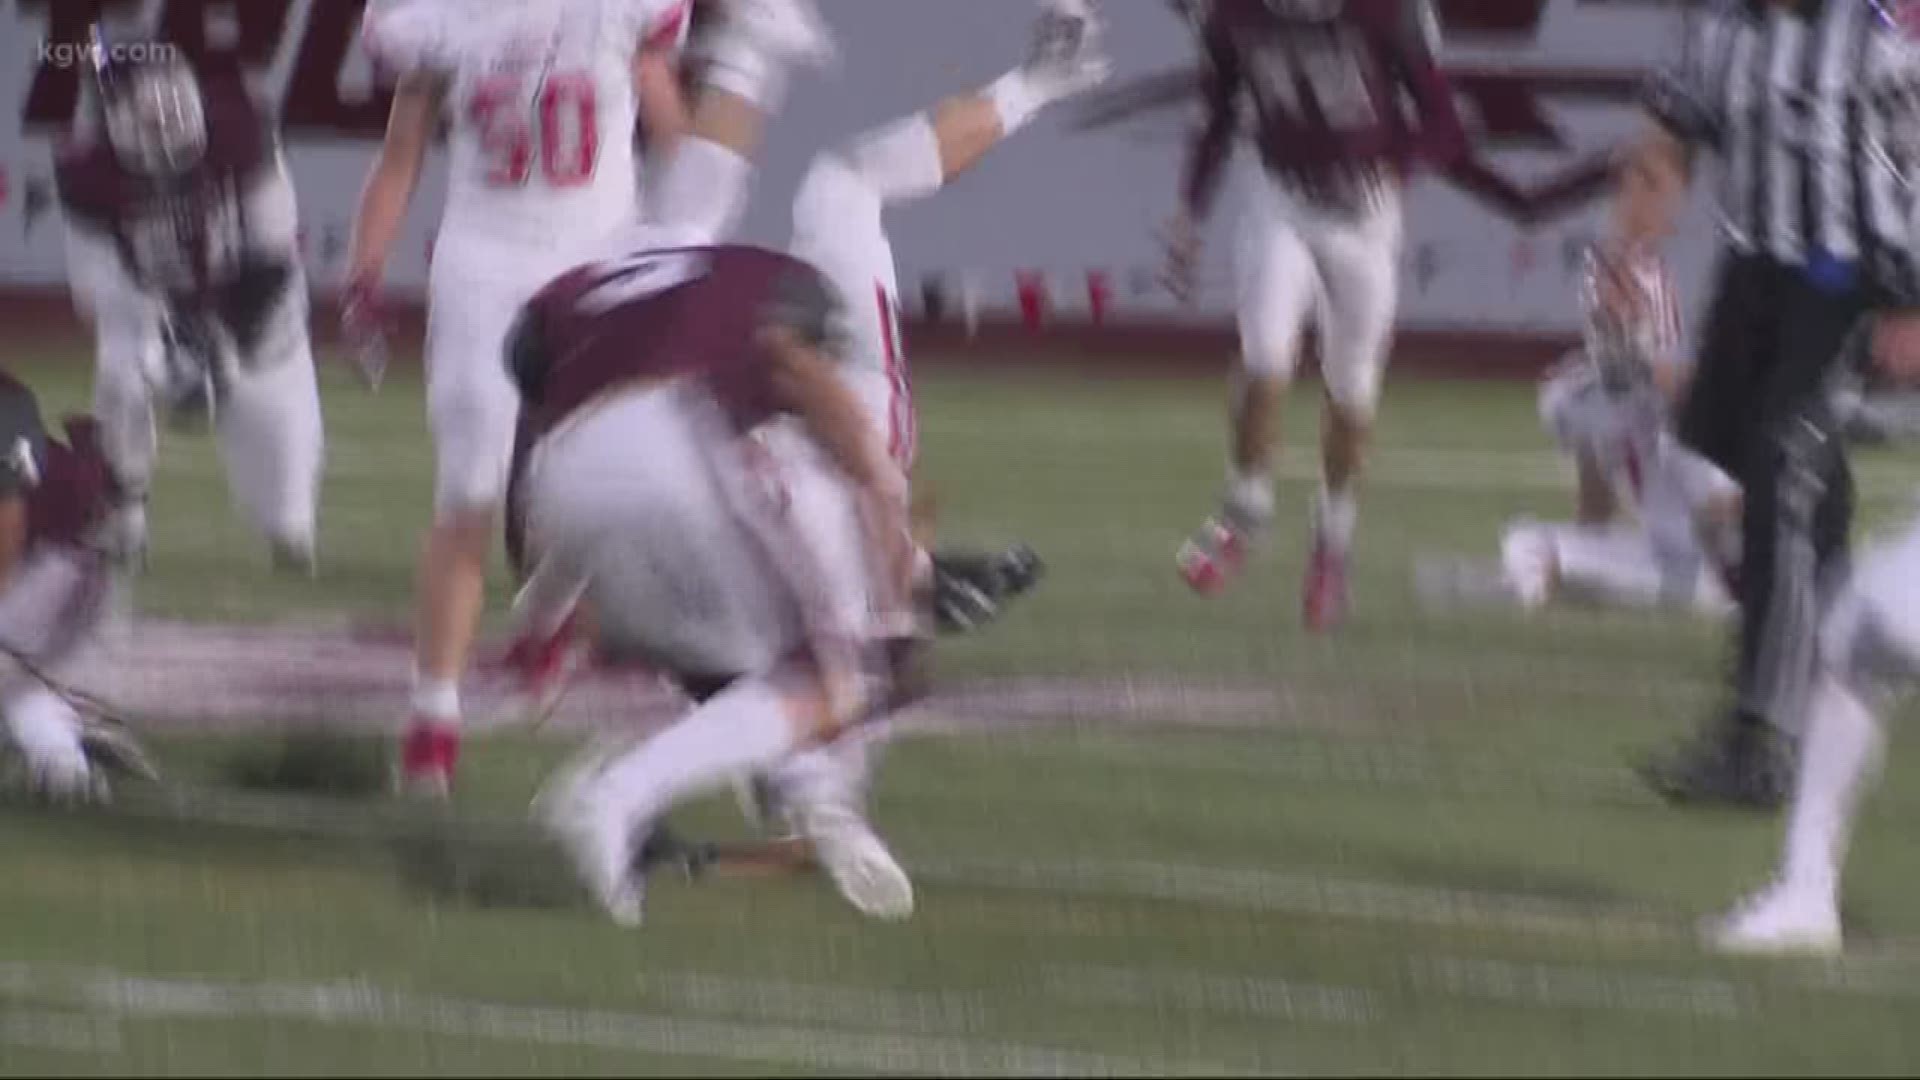 KGW Investigates: The end of high school football in Oregon?